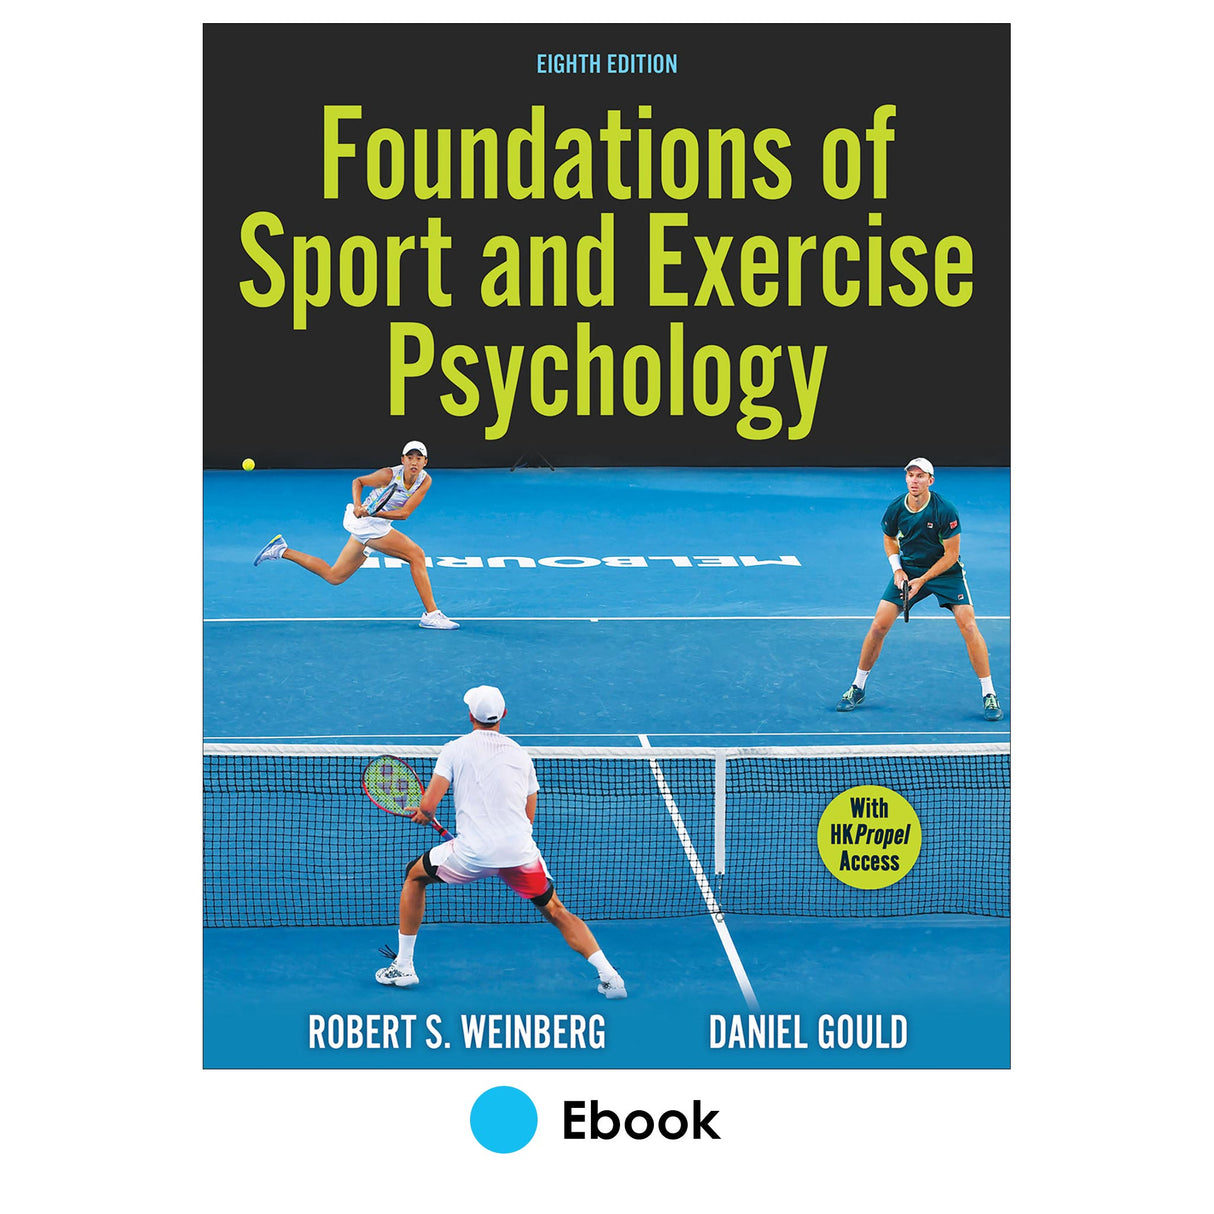 Foundations of Sport and Exercise Psychology 8th Edition Ebook With HKPropel Access